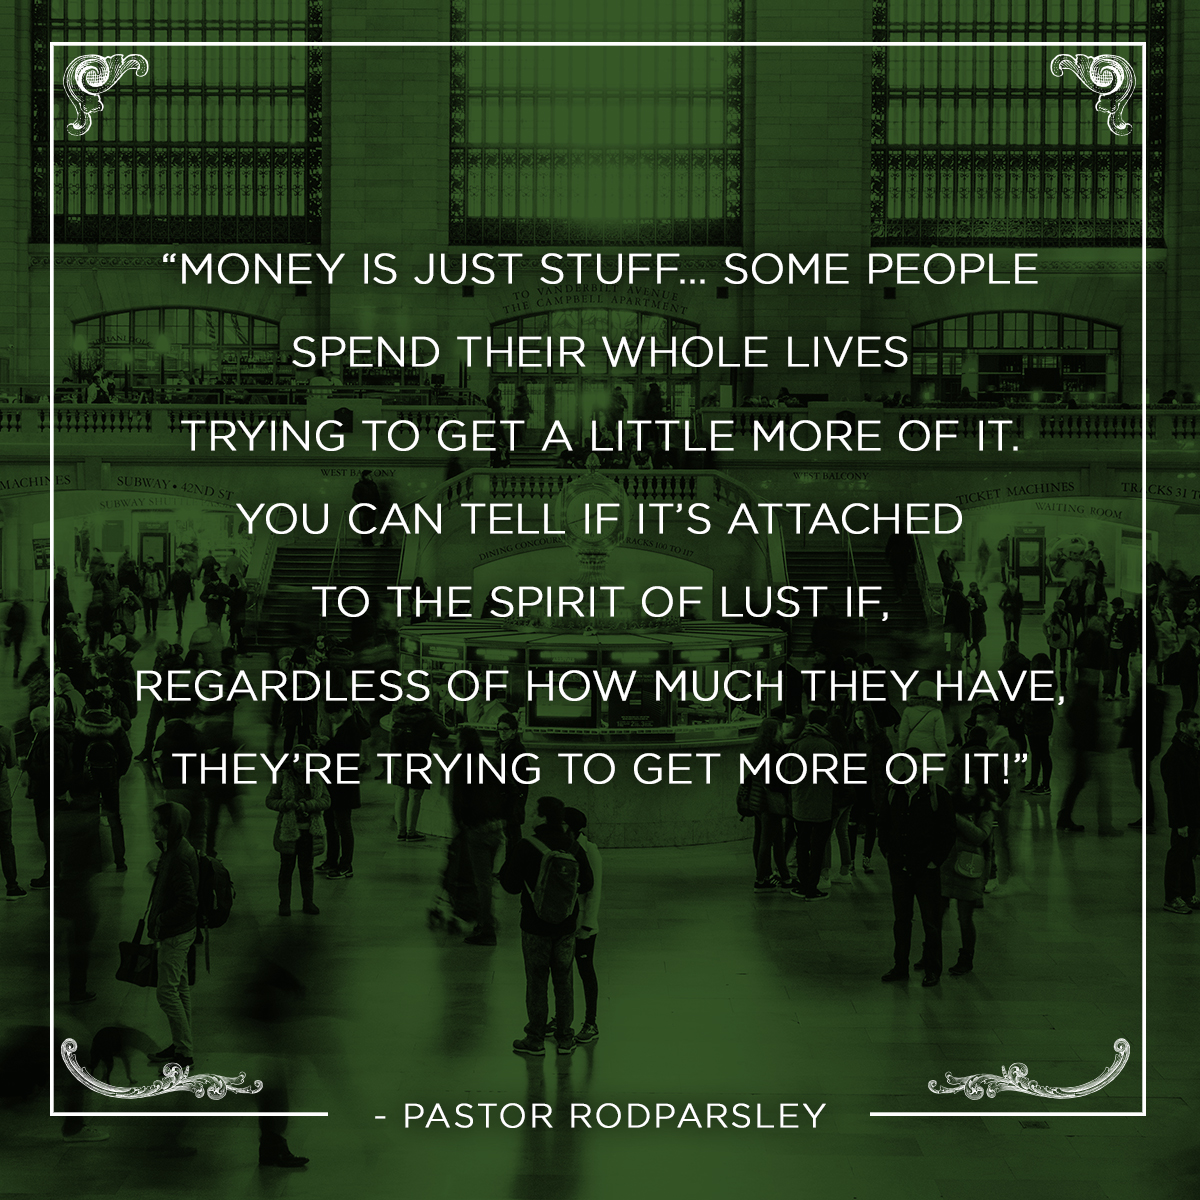 “Money is just stuff… Some people spend their whole lives trying to get a little more of it. You can tell if it’s attached to the spirit of lust if, regardless of how much they have, they’re trying to get more of it!” – Pastor Rod Parsley